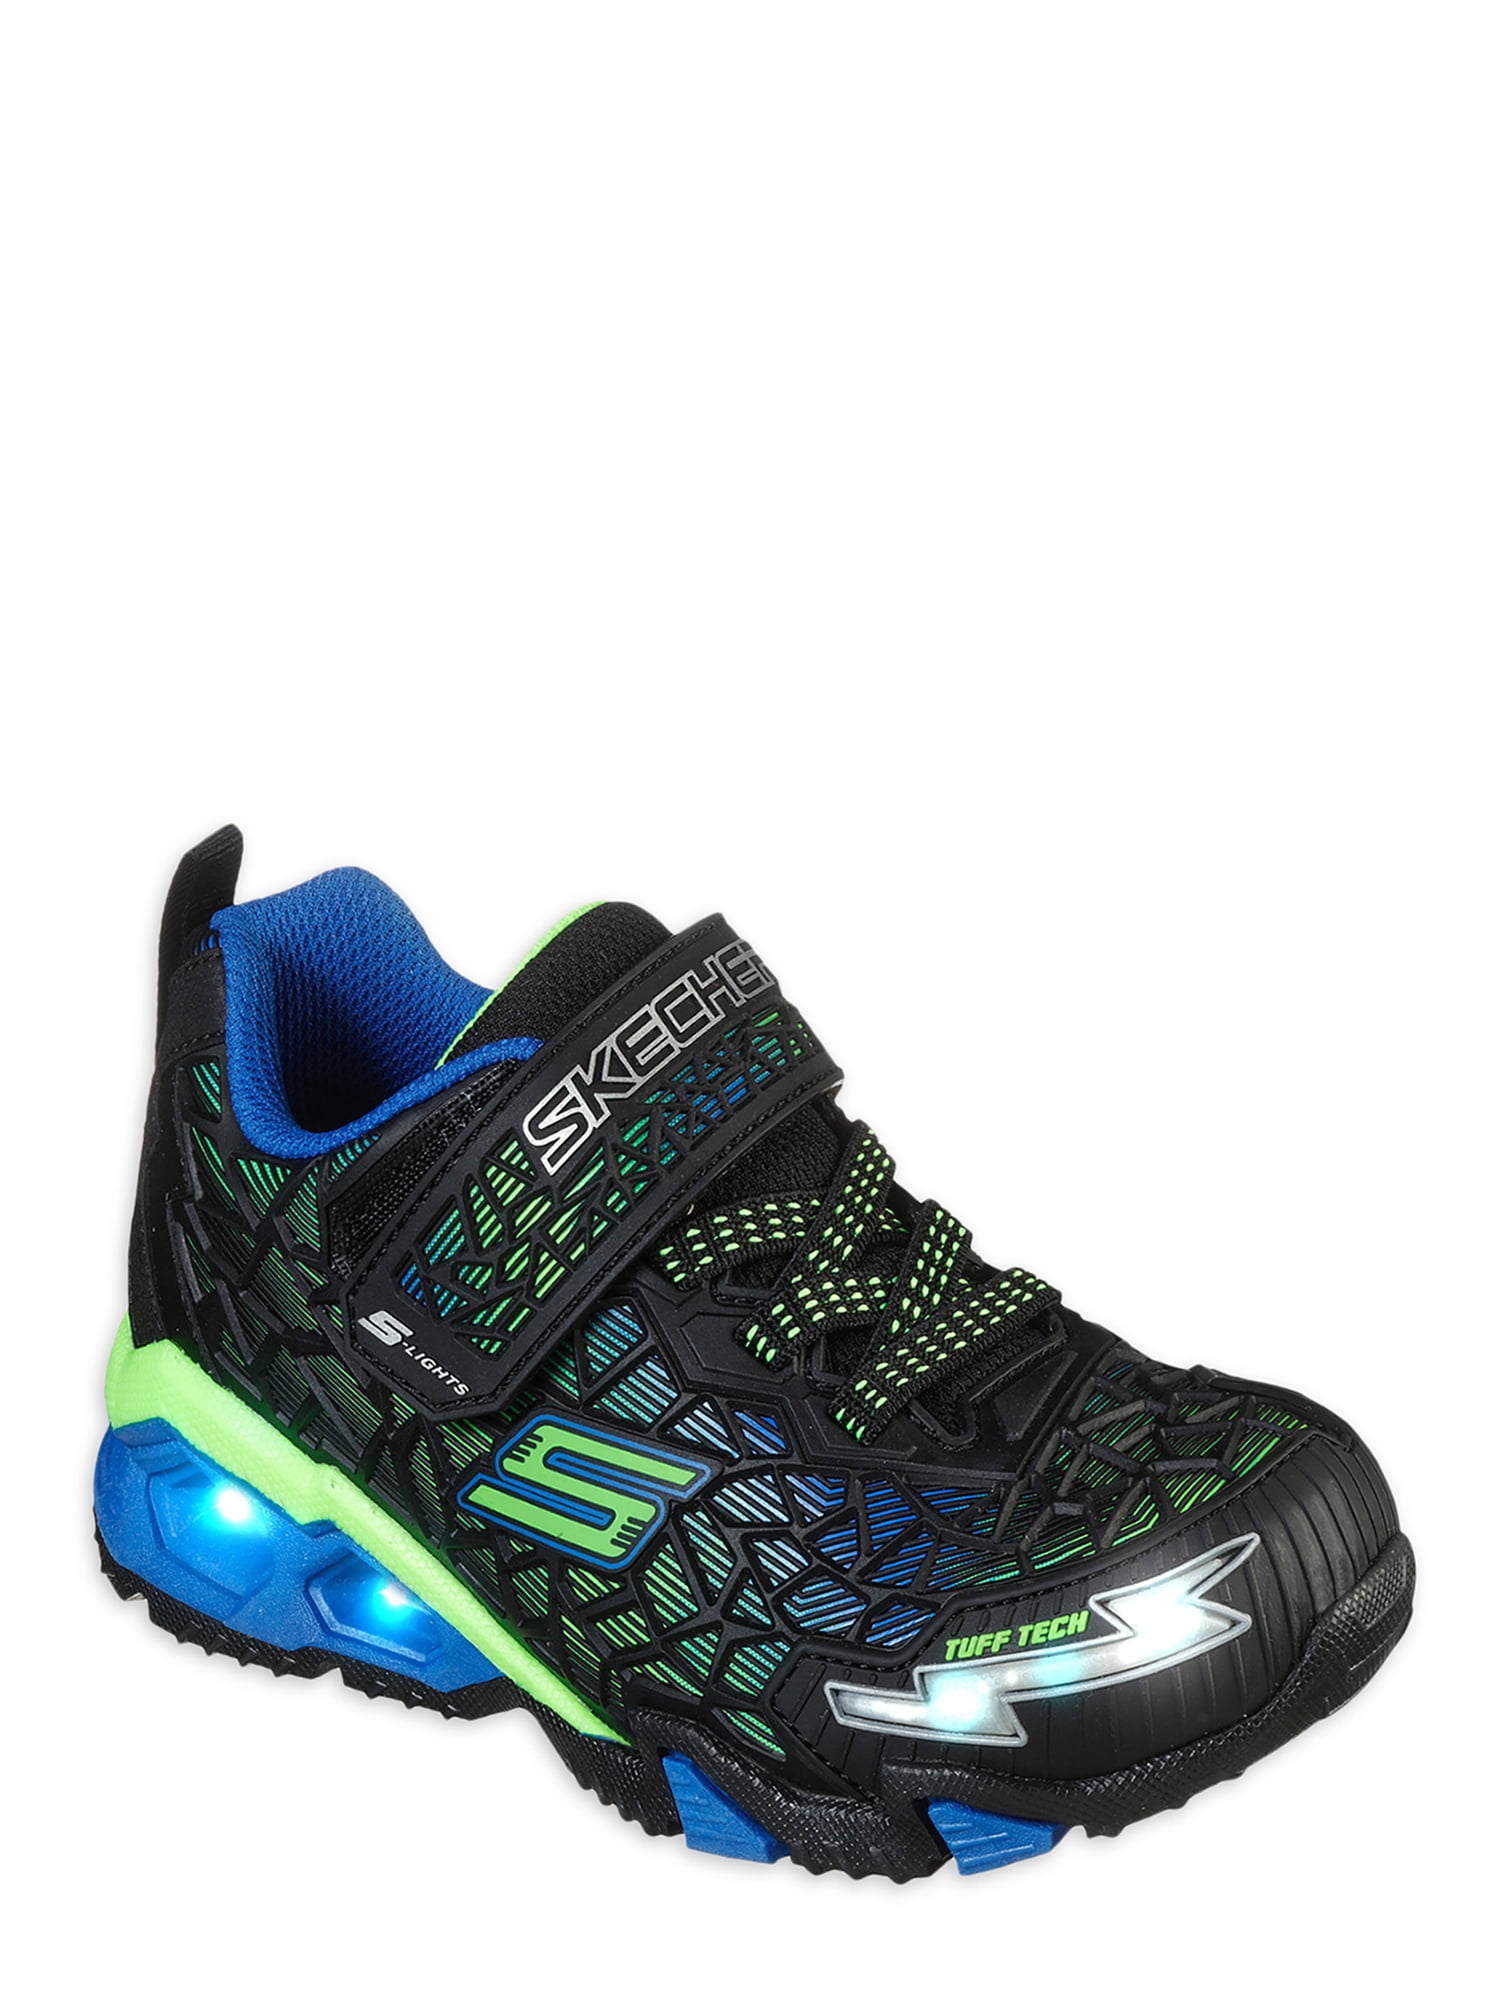 skechers light up shoes size 8